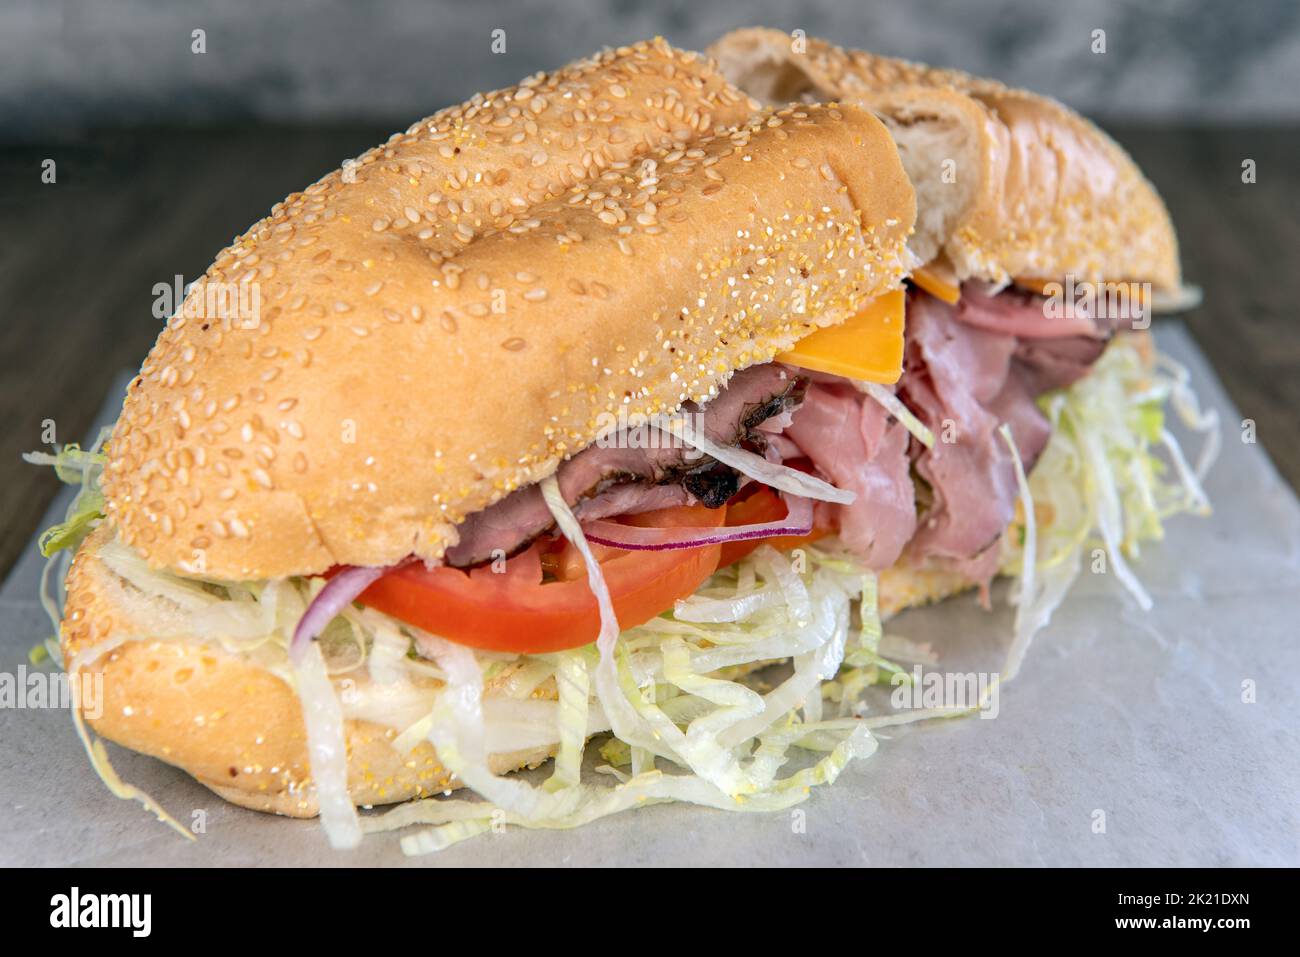 Lunch is served with a loaded roast beef and ranch sandwich overflowing with romaine lettuce. Stock Photo